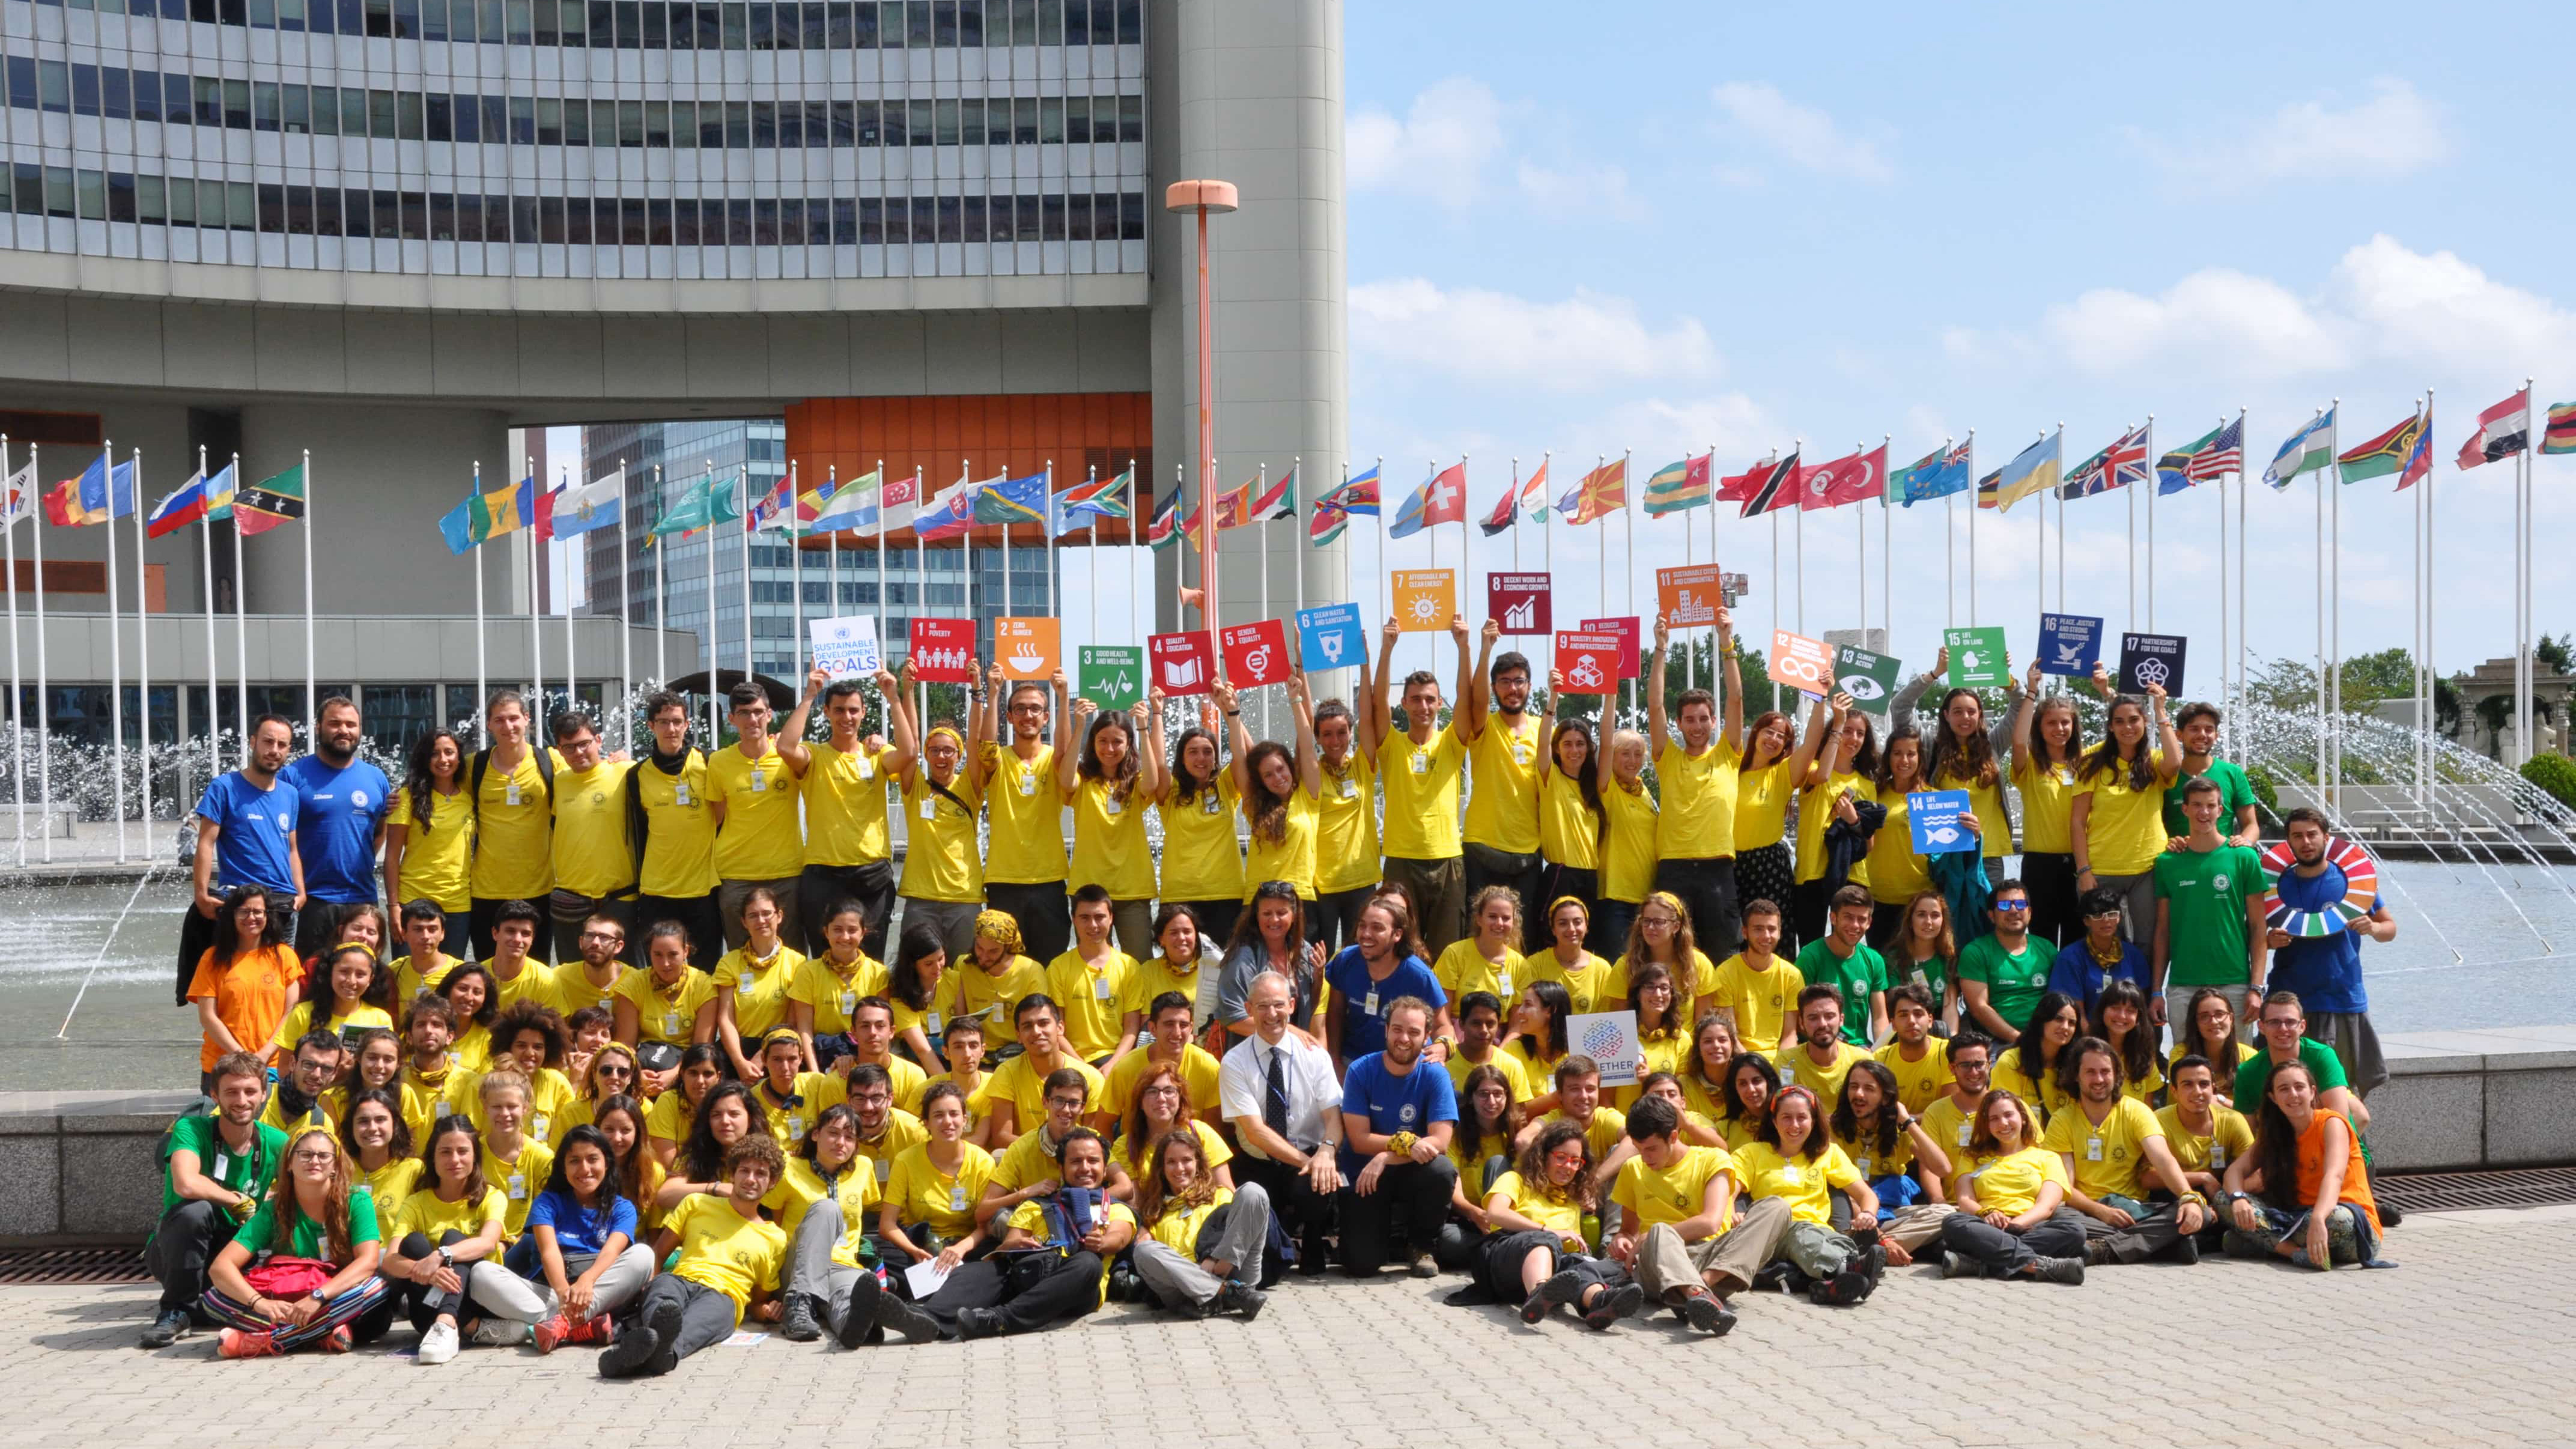 A large group of children wearing yellow t-shirts hold up SDG signs outside the UN in Vienna